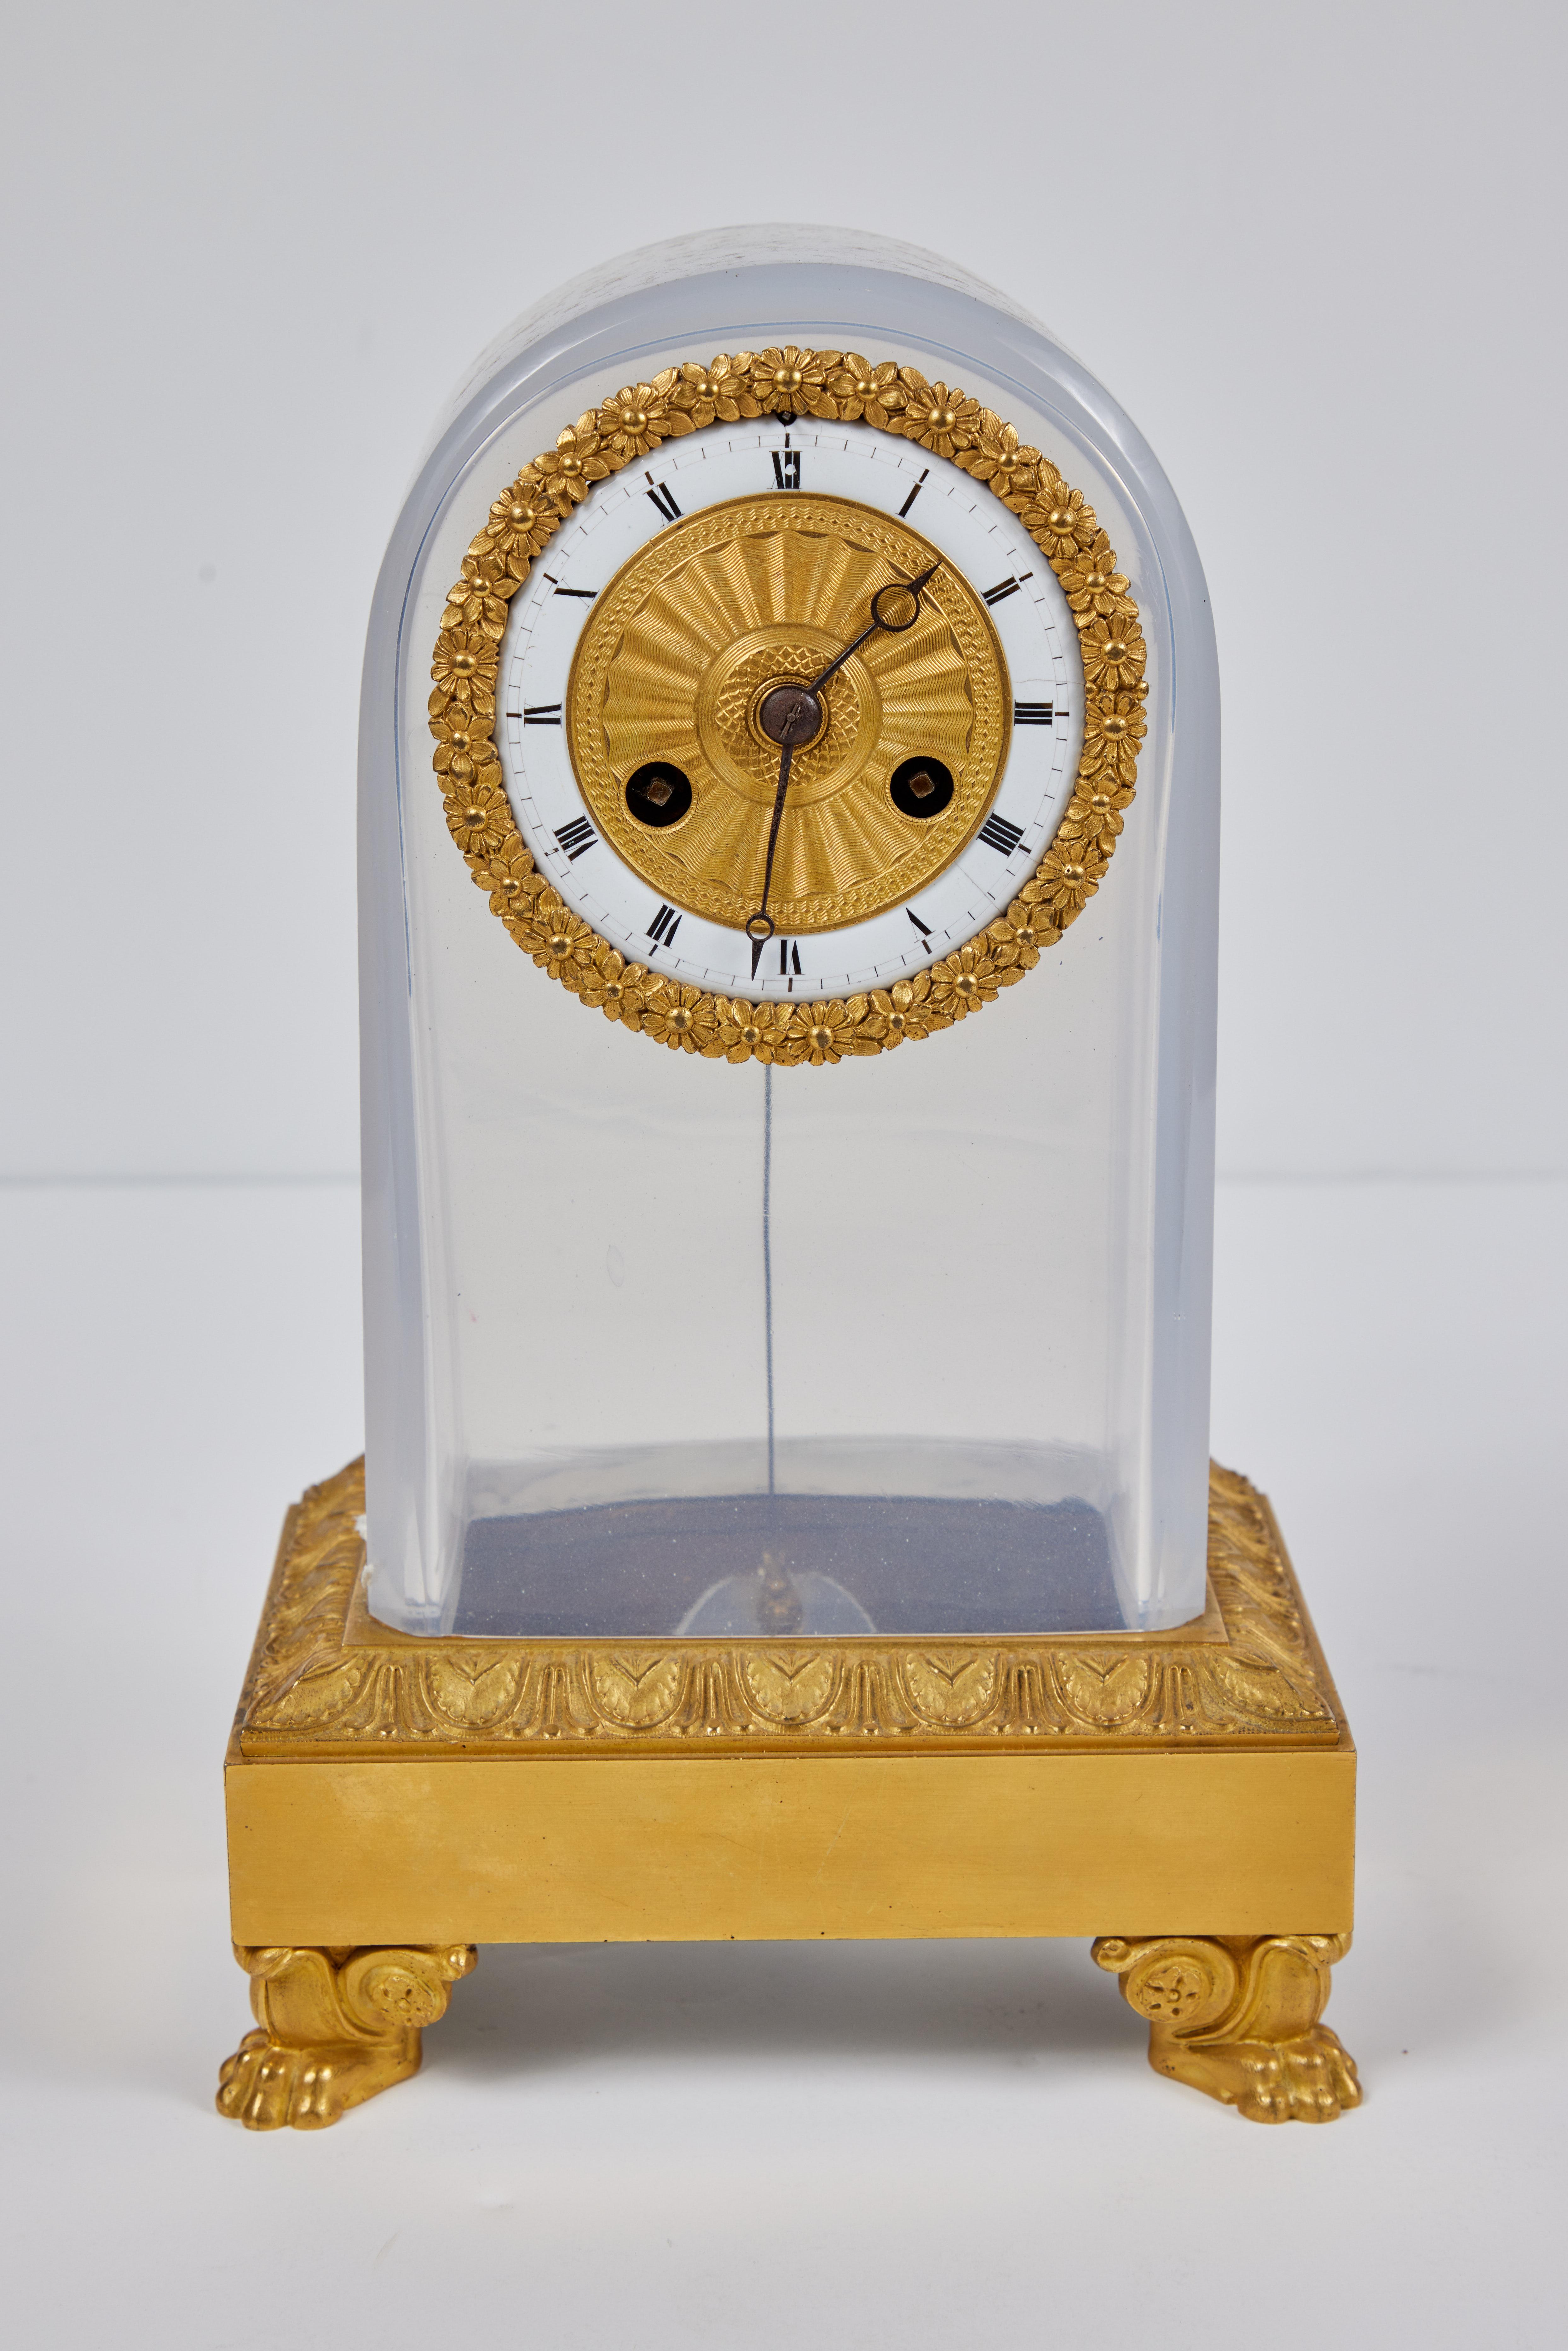 A chic, c. 1825 French, looping desk clock with a central timepiece framed in foliate embellished, bronze doré wreath. The clock set into a pale blue, Opaline glass casing atop a gilt bronze base that sits on four, paw feet.